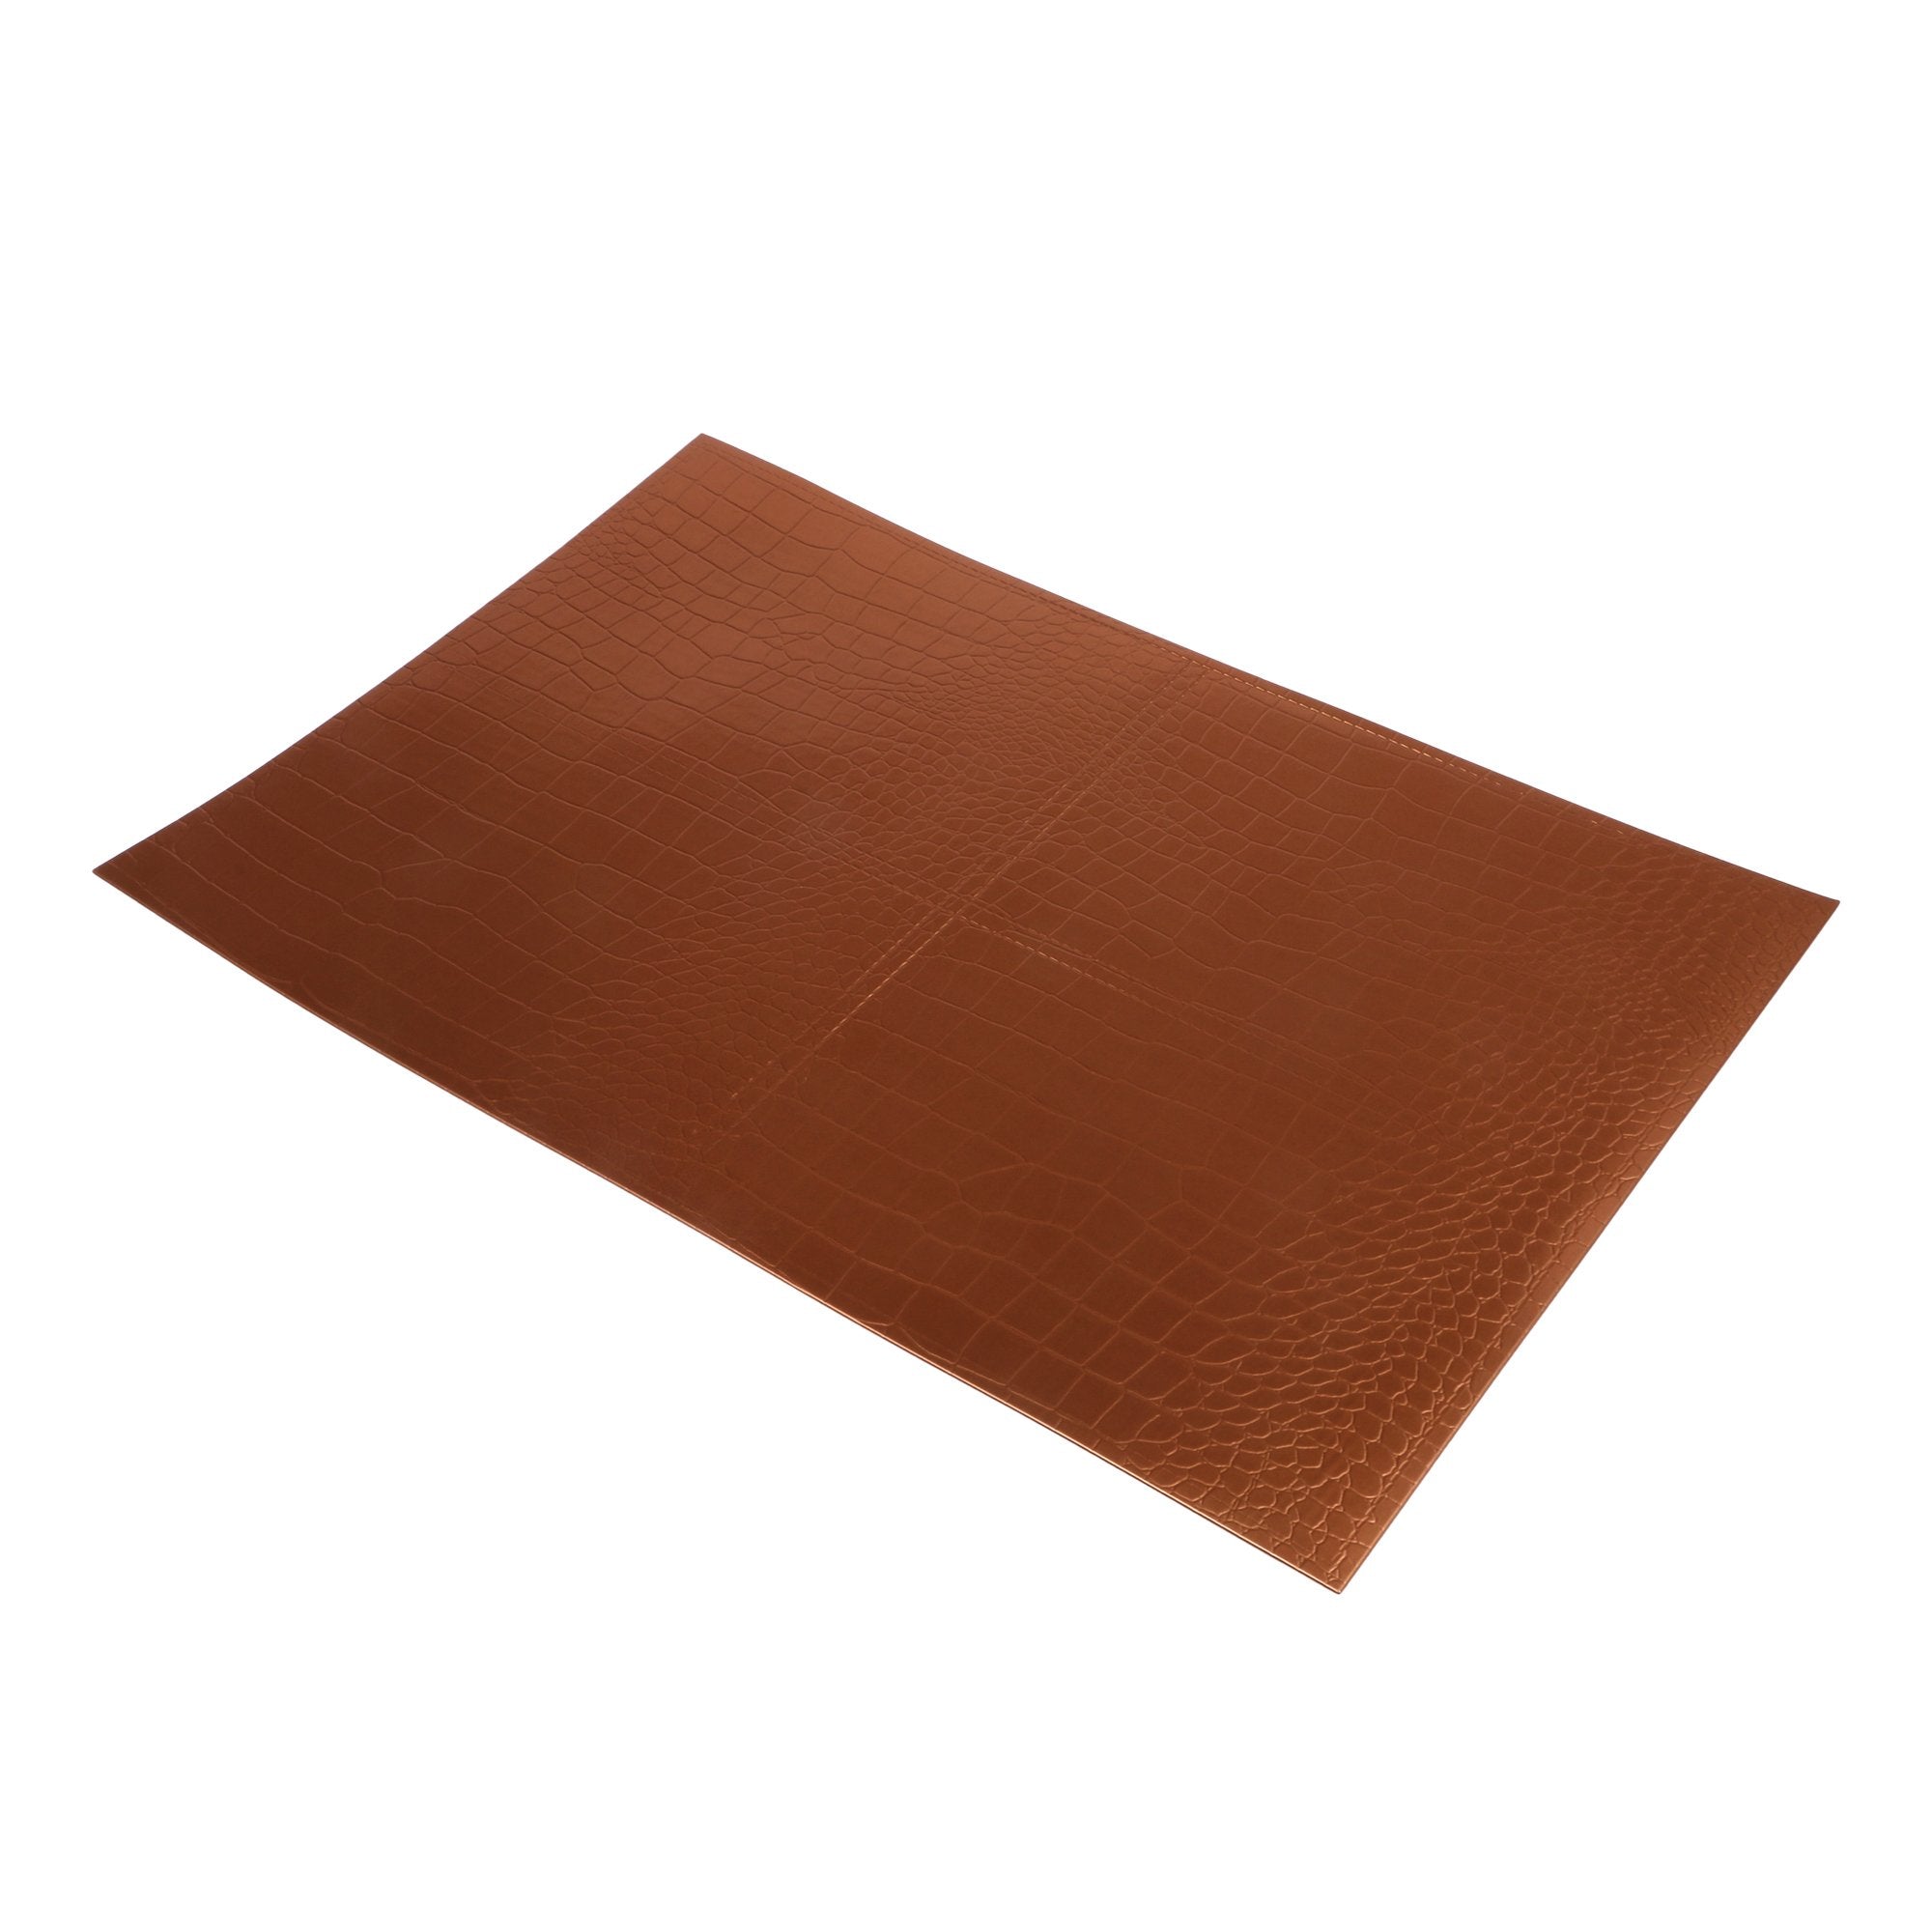 Rectangular Set of 6 pcs PU Leather Solid Place Mats, Best for Dining Table/Bedside Table, Center Table